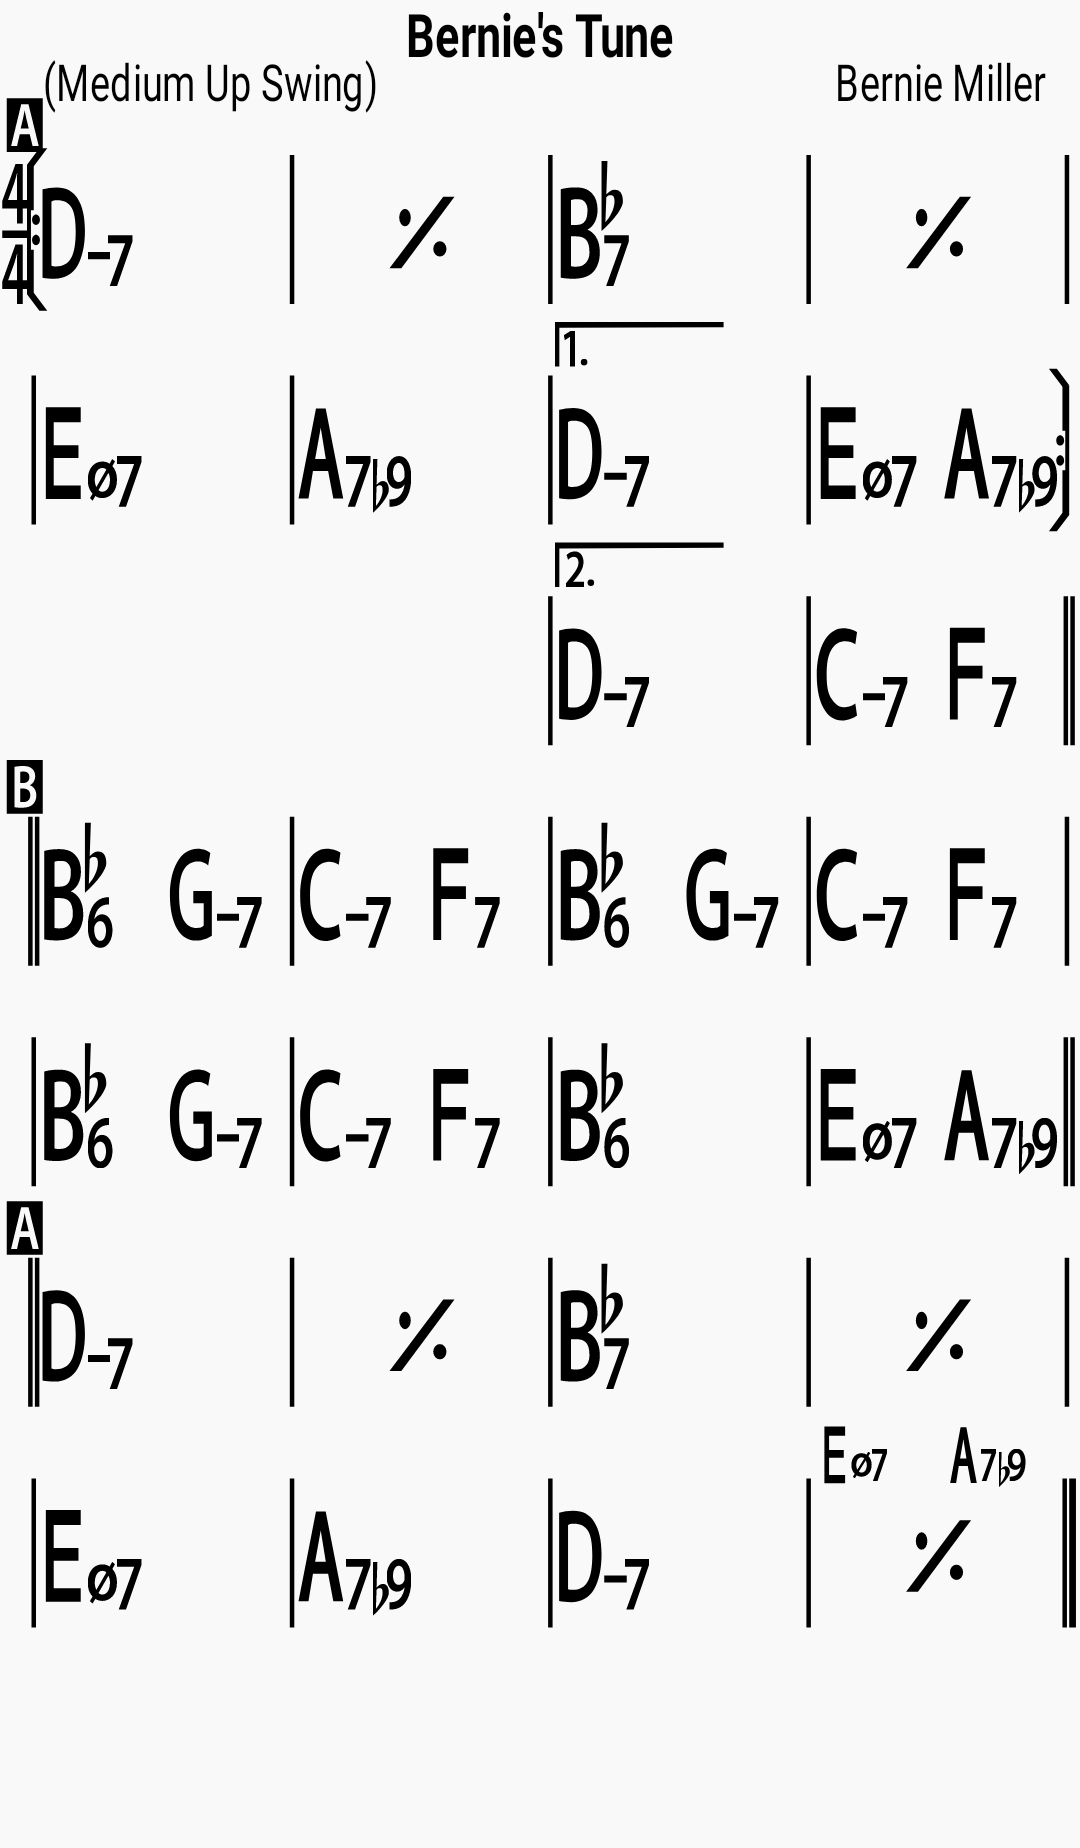 Chord chart for the jazz standard Bernie's Tune